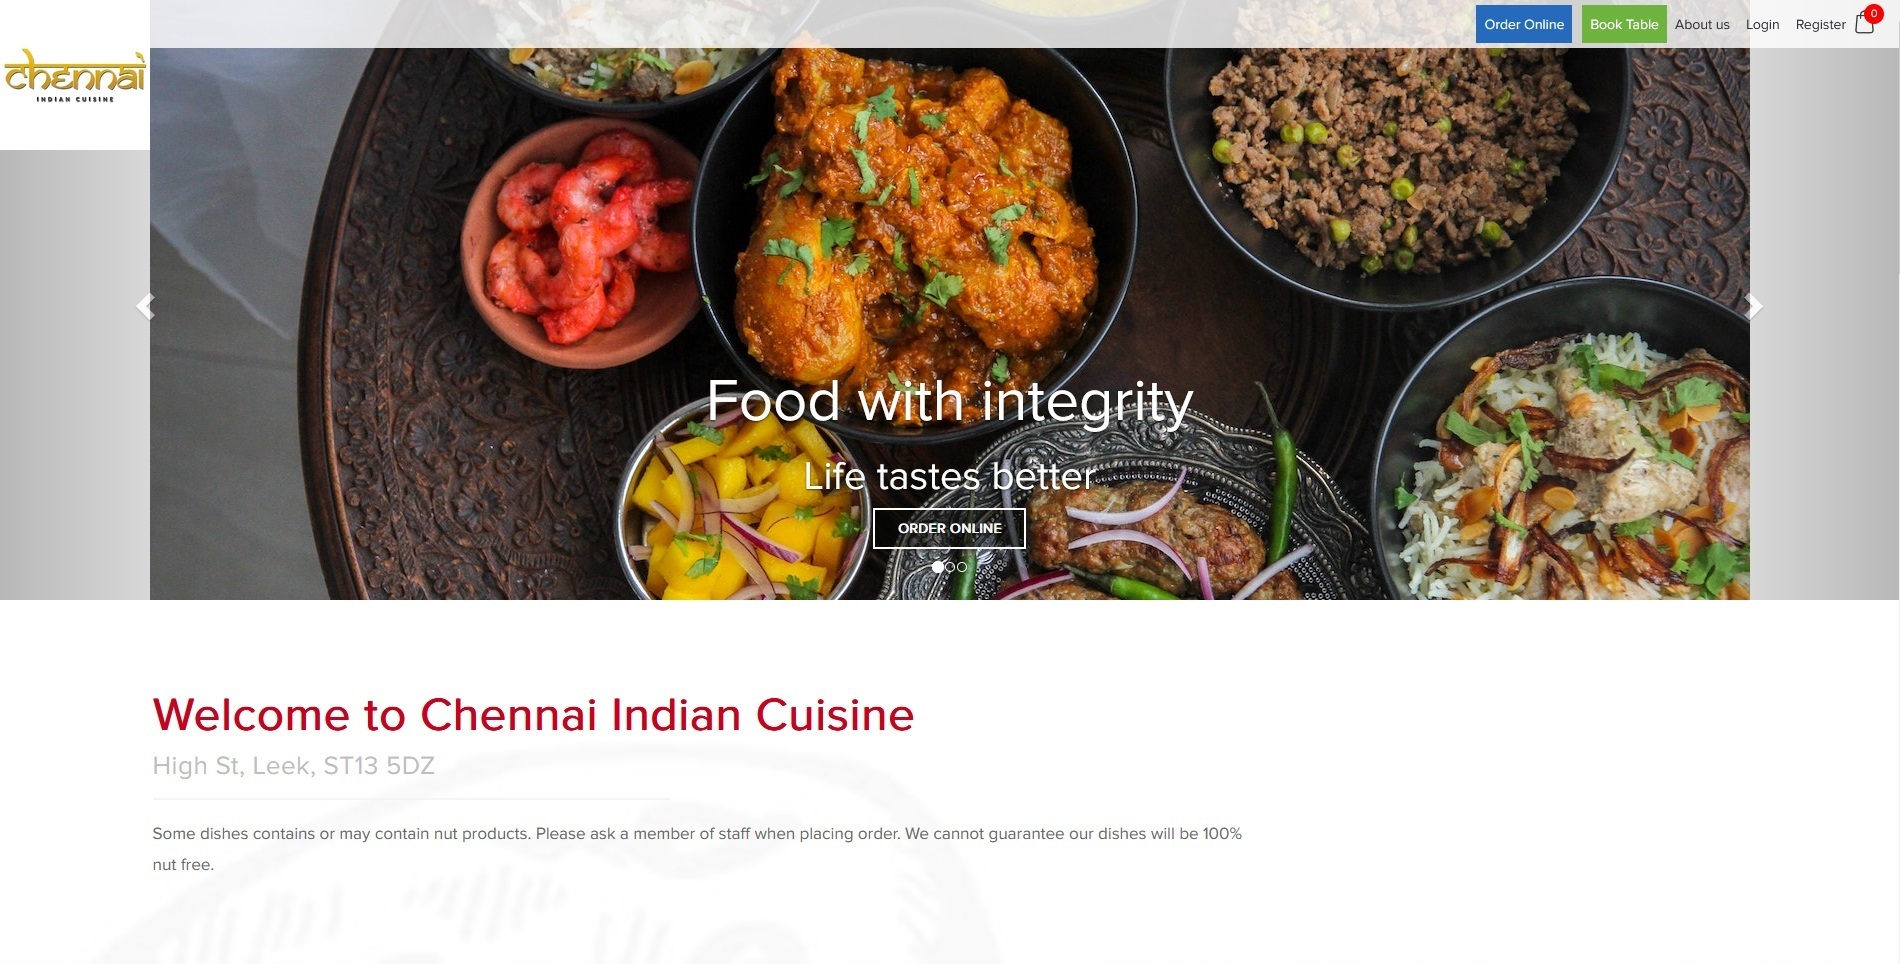 image of the Chennai Indian Cuisine website